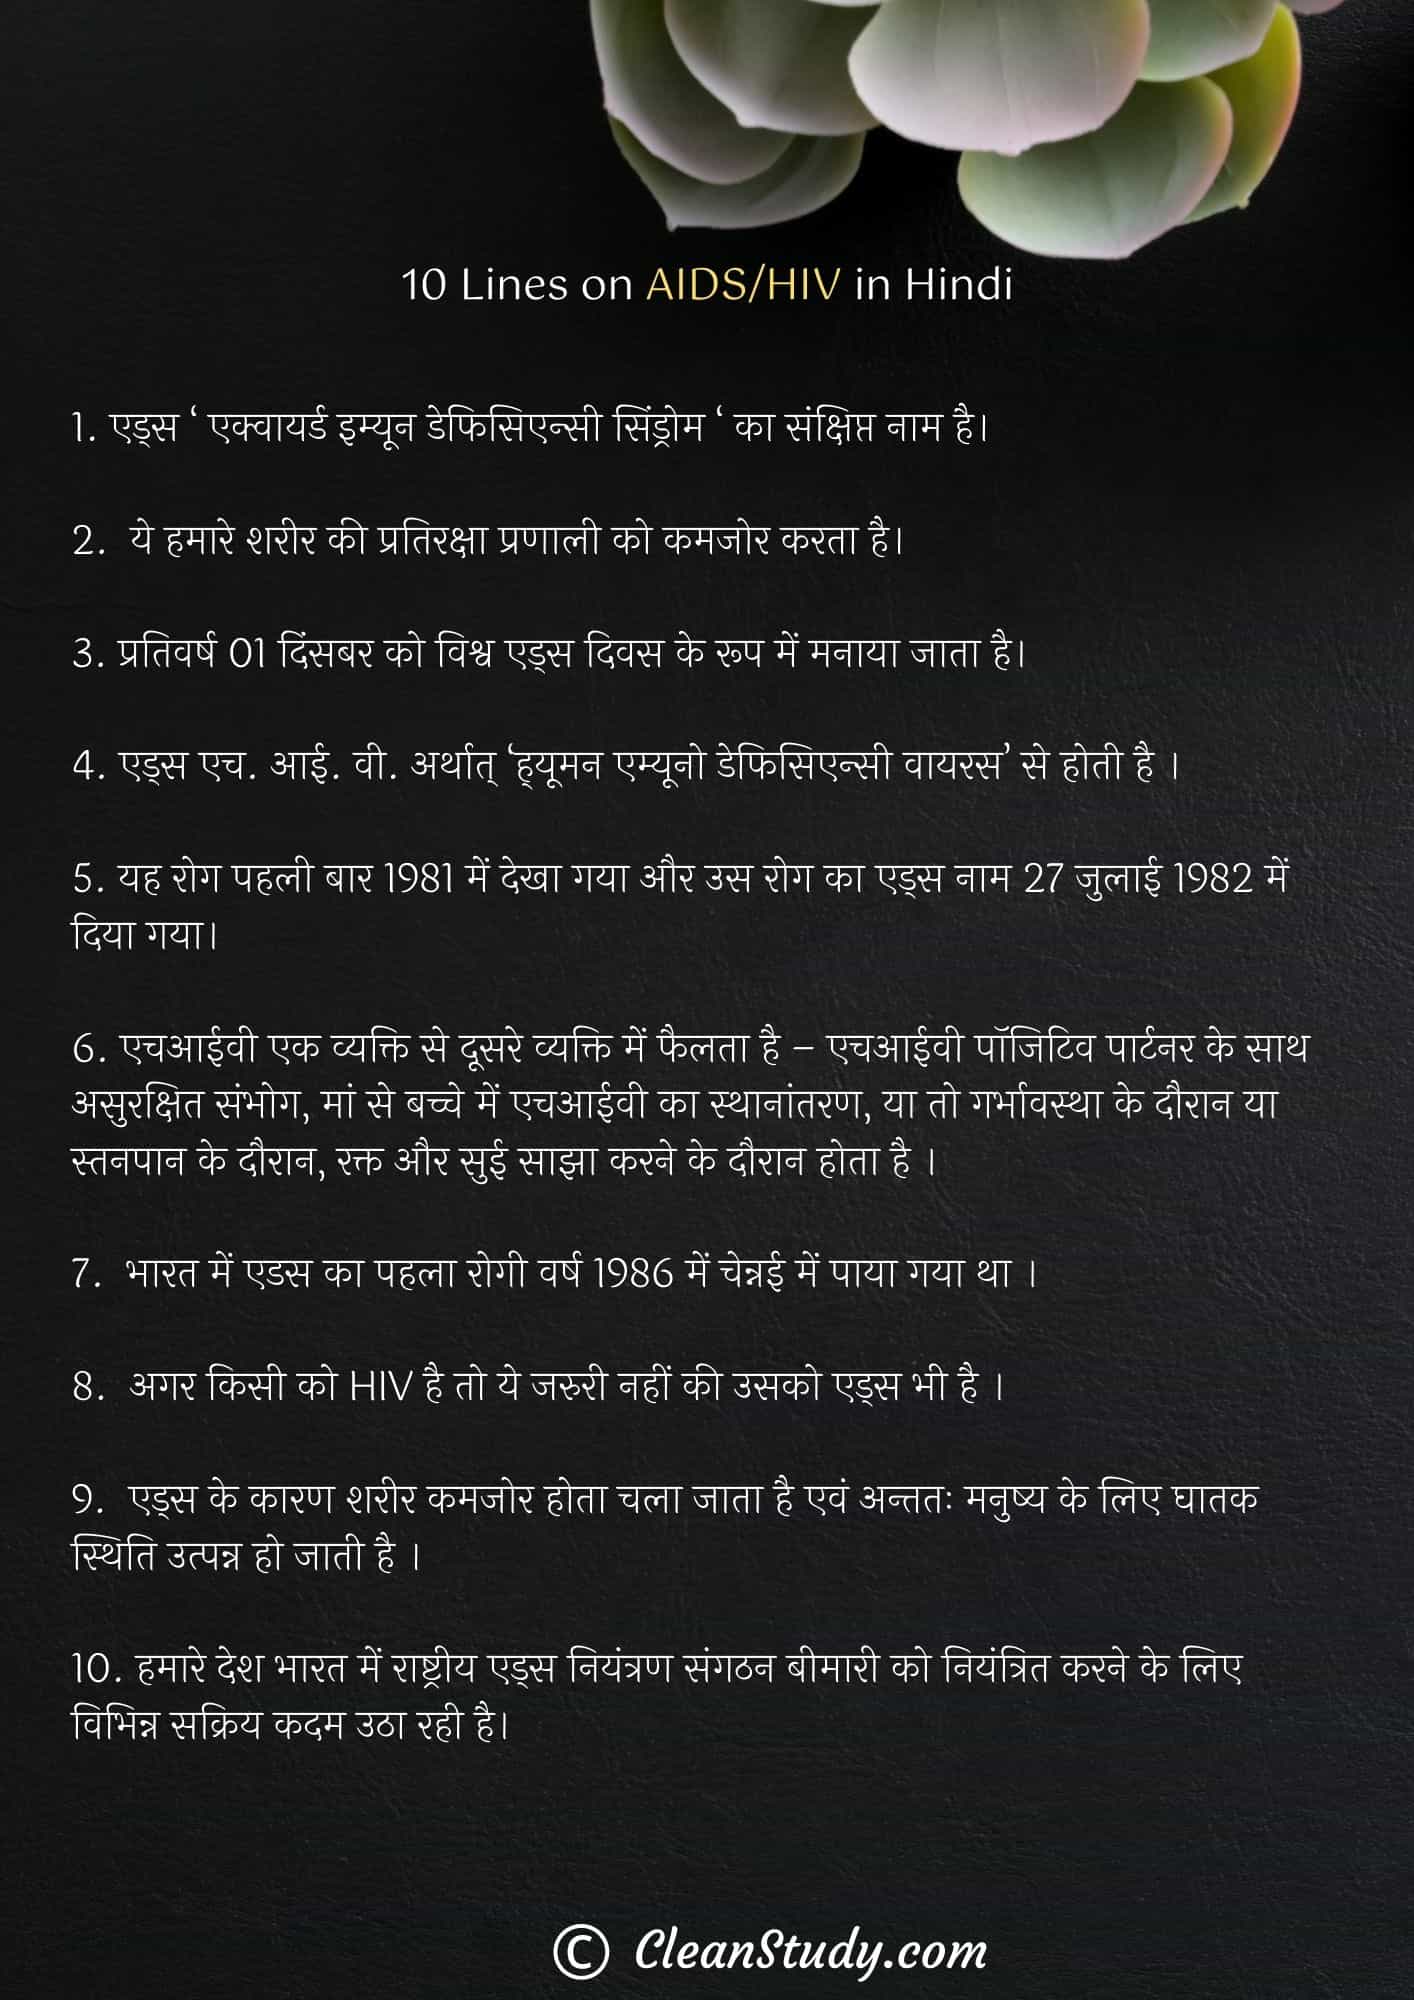 10 Lines on AIDS in Hindi